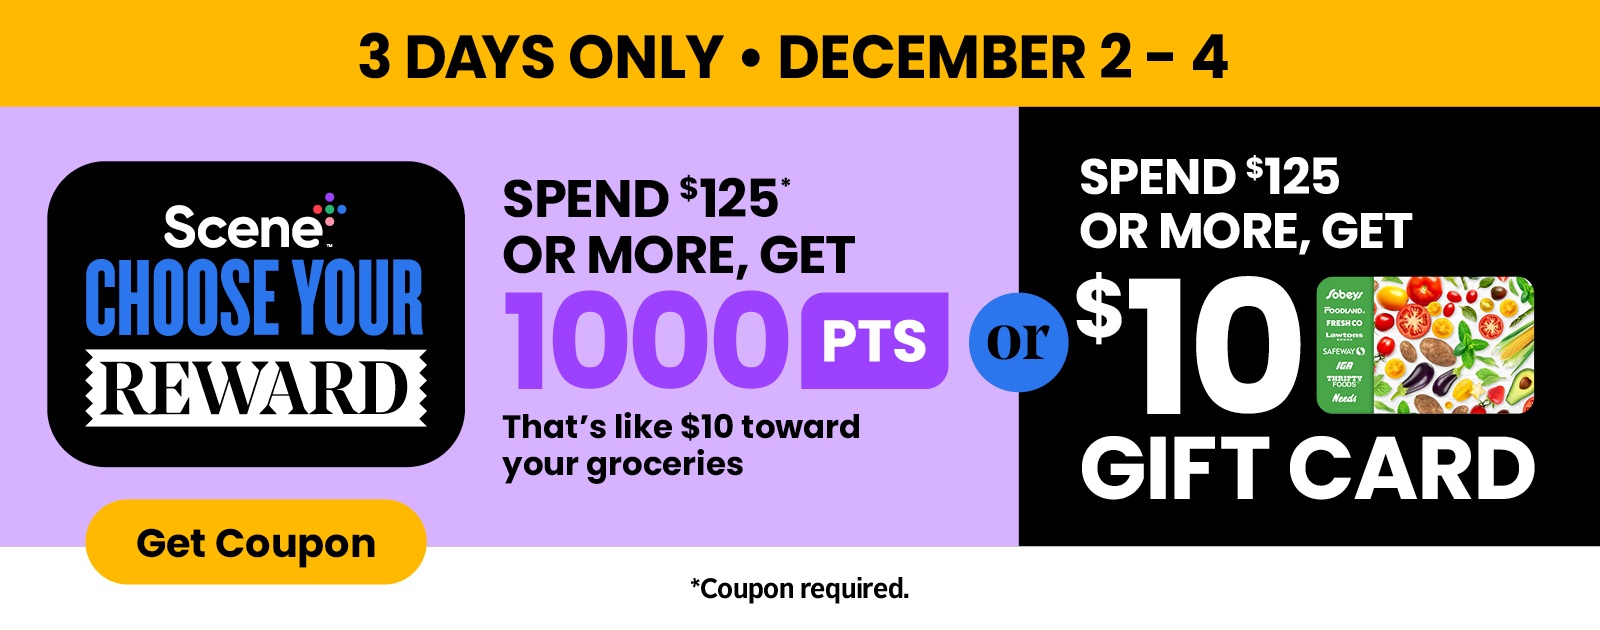 Text Reading '3 days only, from December 2 to December 4. Spend $125 or more and get a $10 toward your groceries or Spend $125 or more and get $10 Gift Card. Coupon required. 'Get coupon' from the button given below.'